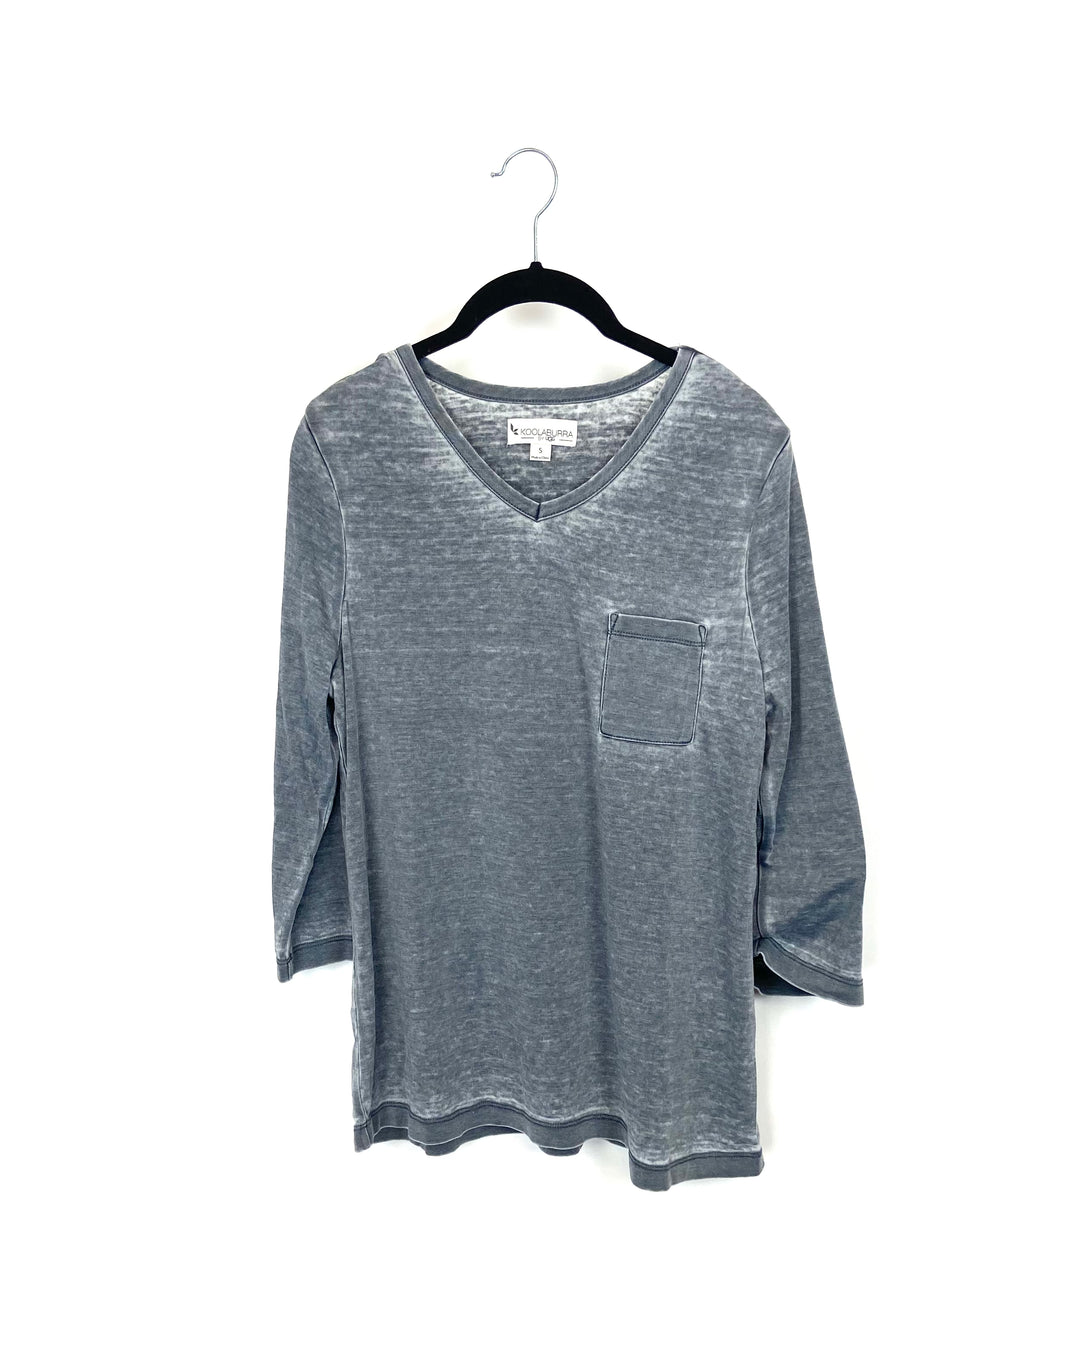 Grey Long Sleeve Top - Size Small